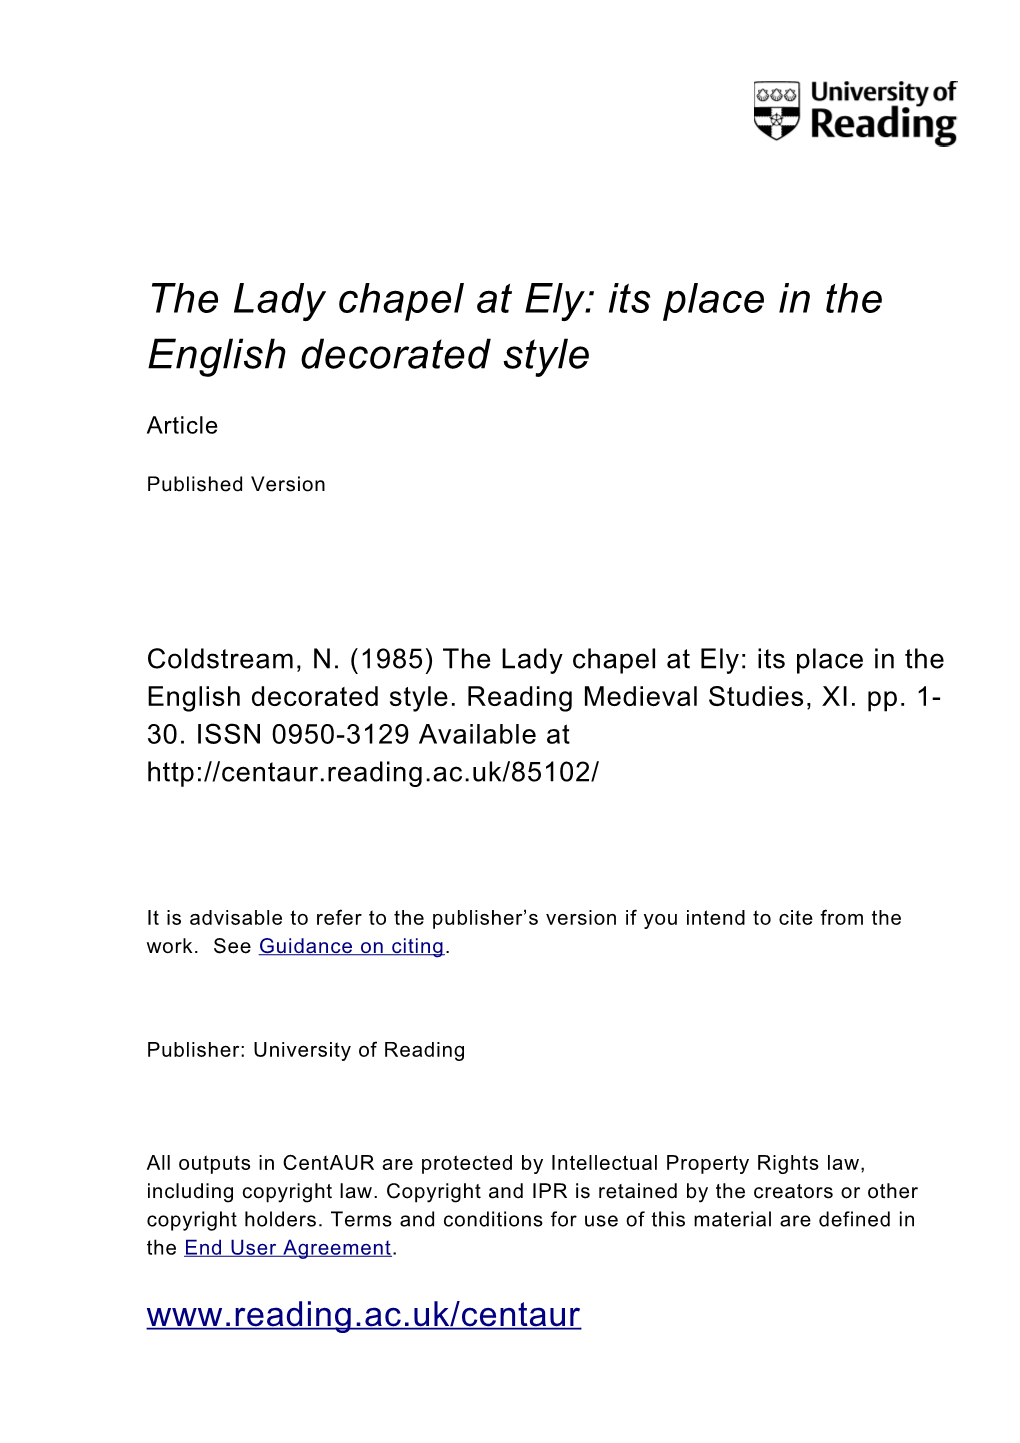 The Lady Chapel at Ely: Its Place in the English Decorated Style